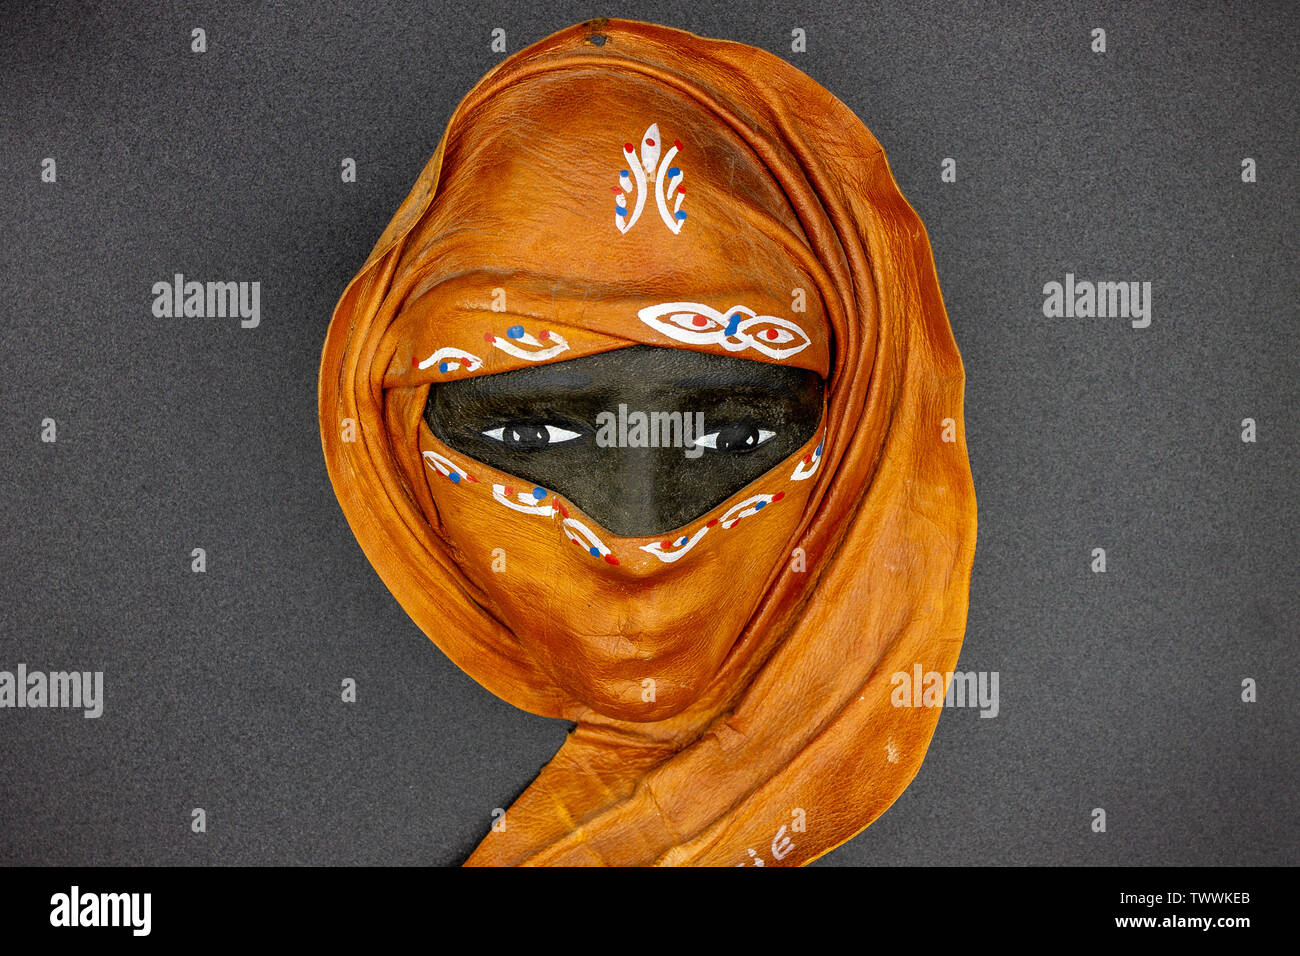 Naples Italy. In the foreground a mask depicting a typical face of a woman with African features and with burqa. Stock Photo